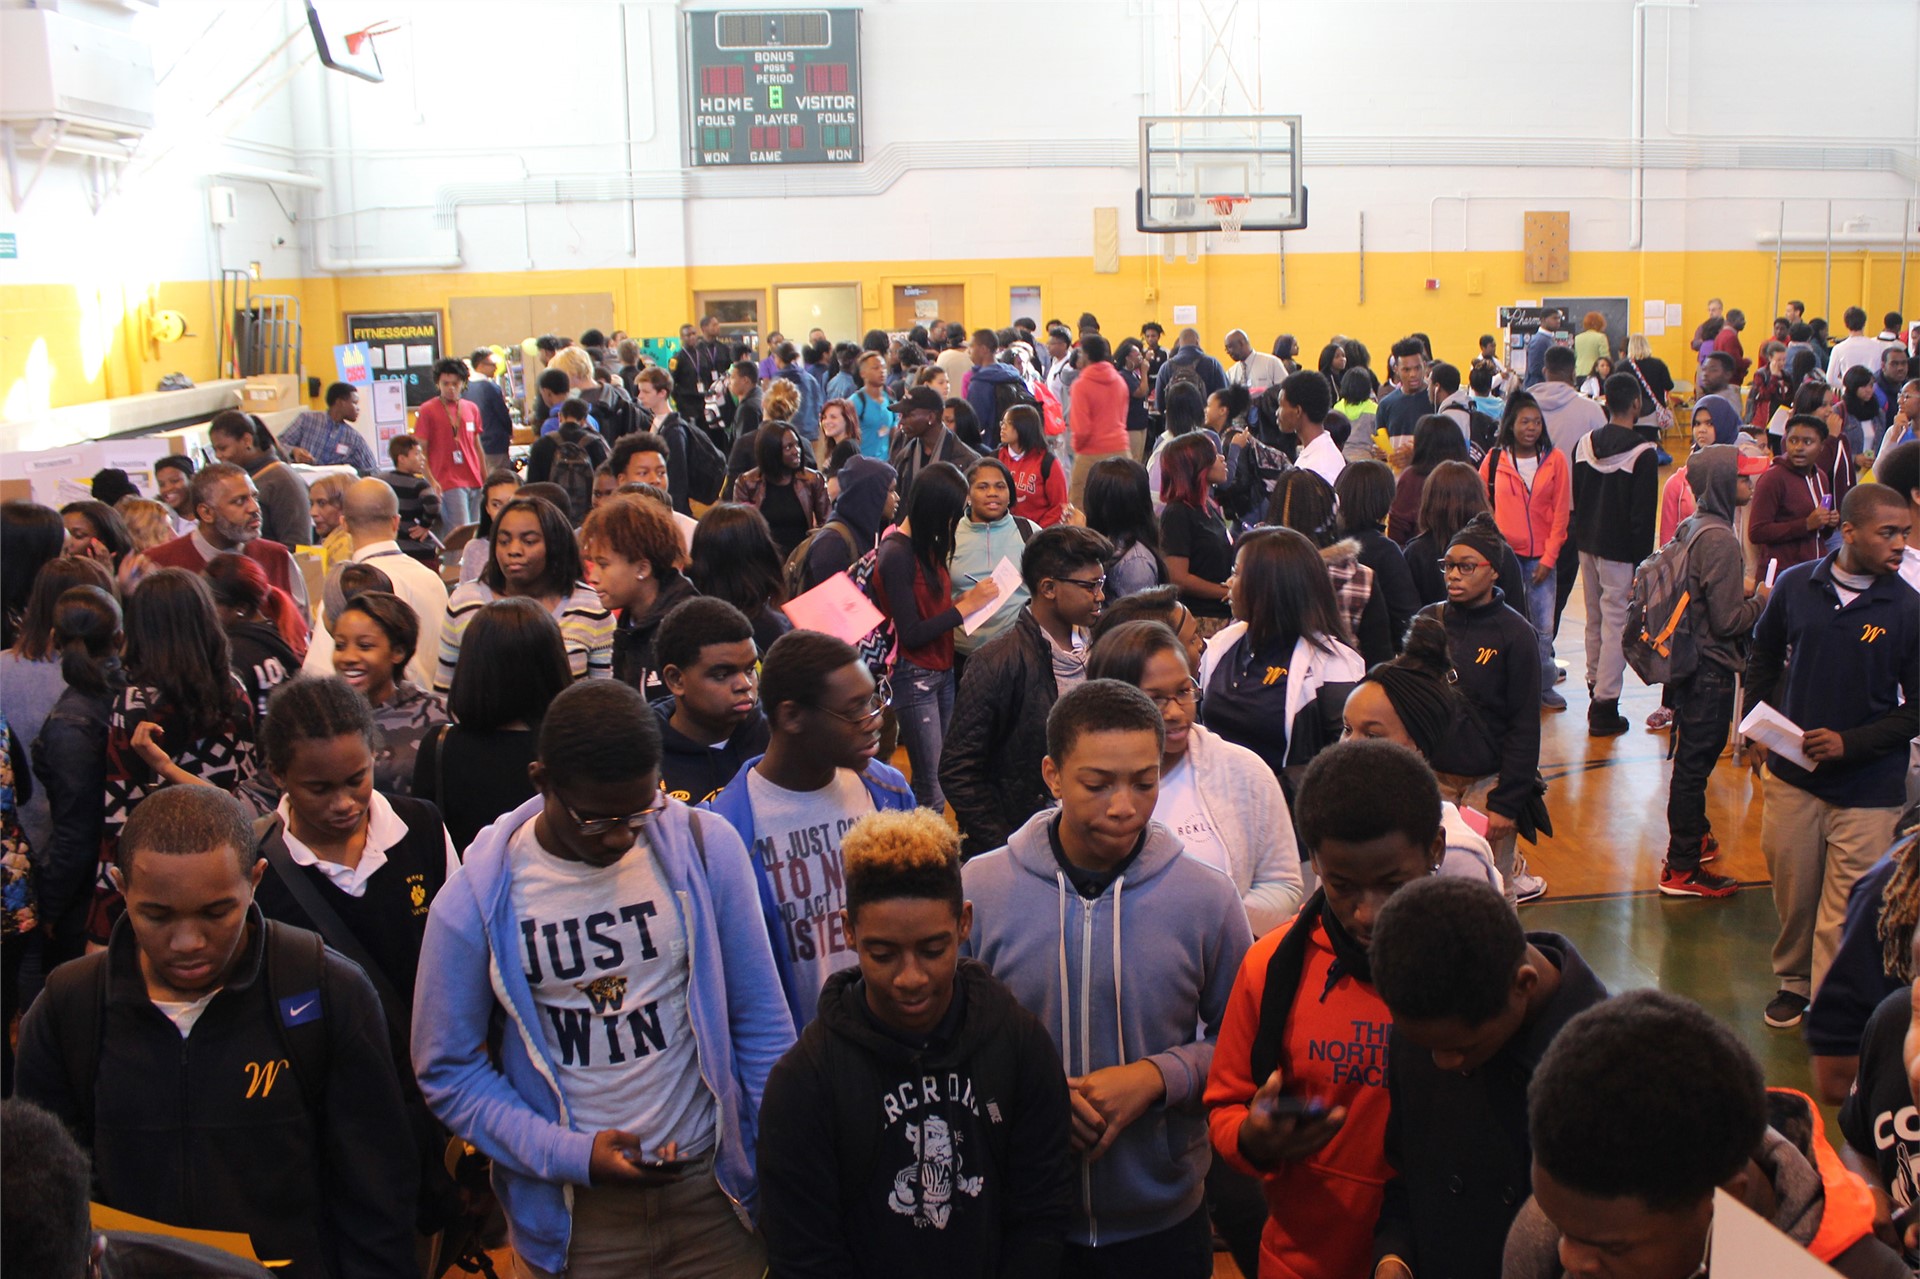 Sophomores from CHHS, Shaker Heights High and Warrensville Heights High packed the gym on Thursday.